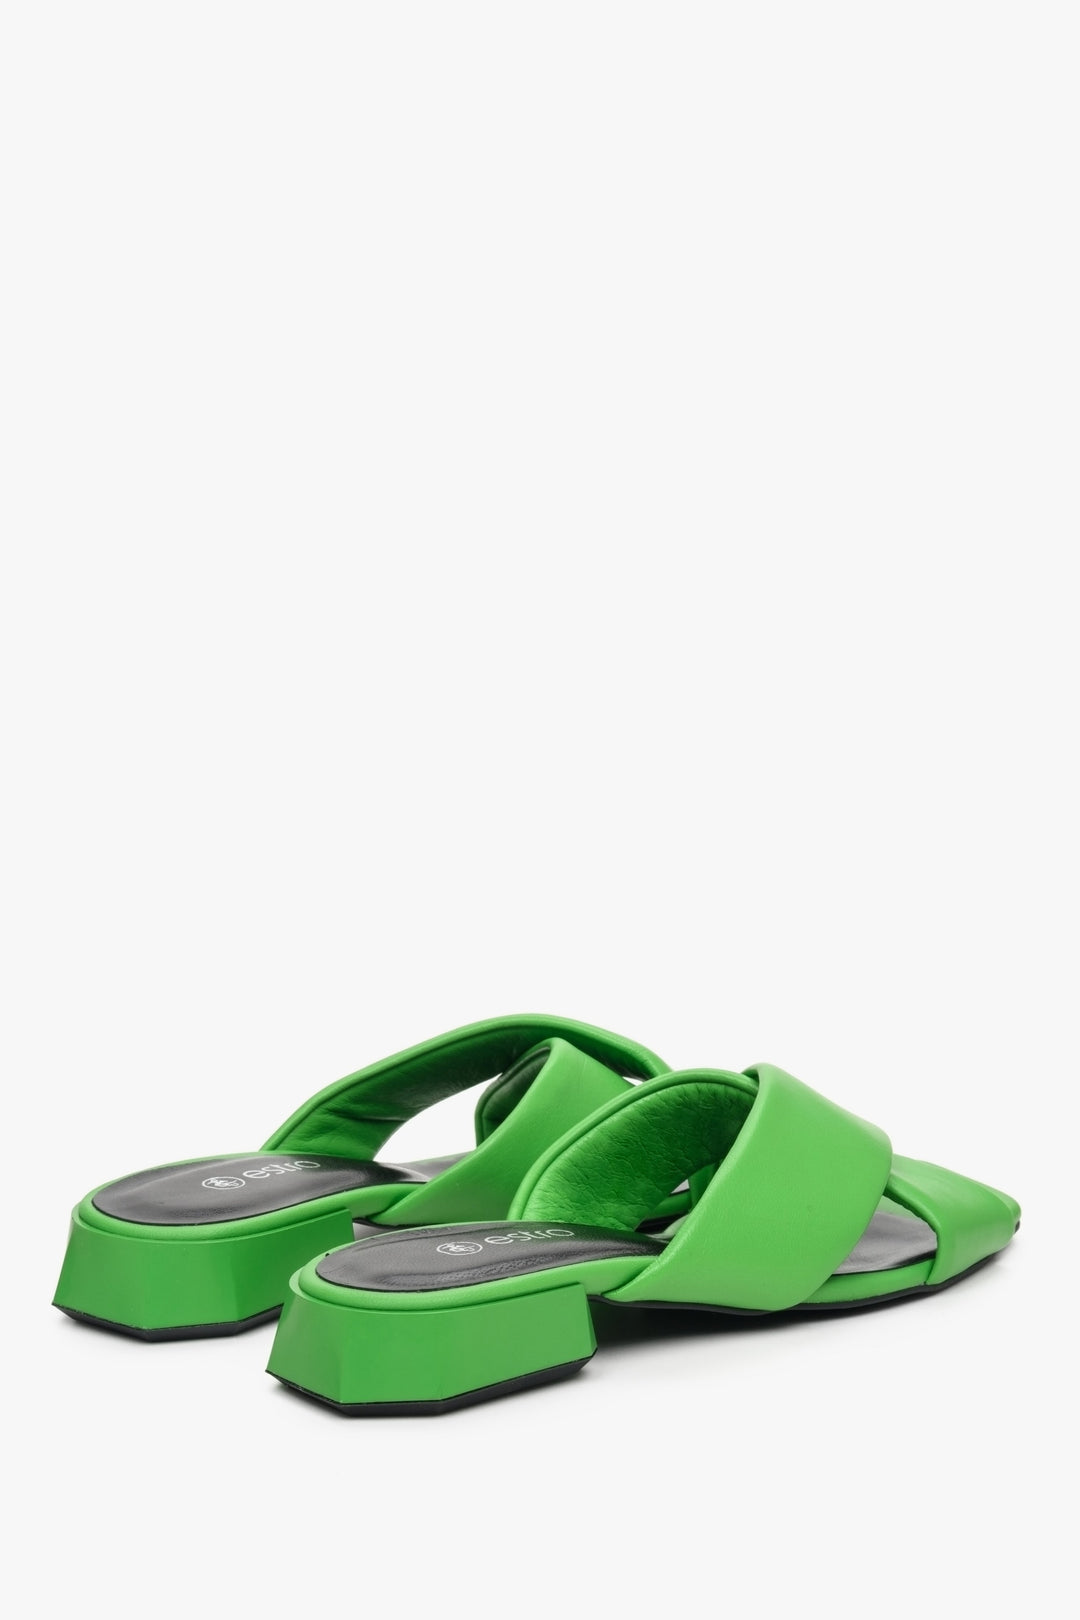 Women's low-heeled leather mules in green - close-up on back tip of the shoe.